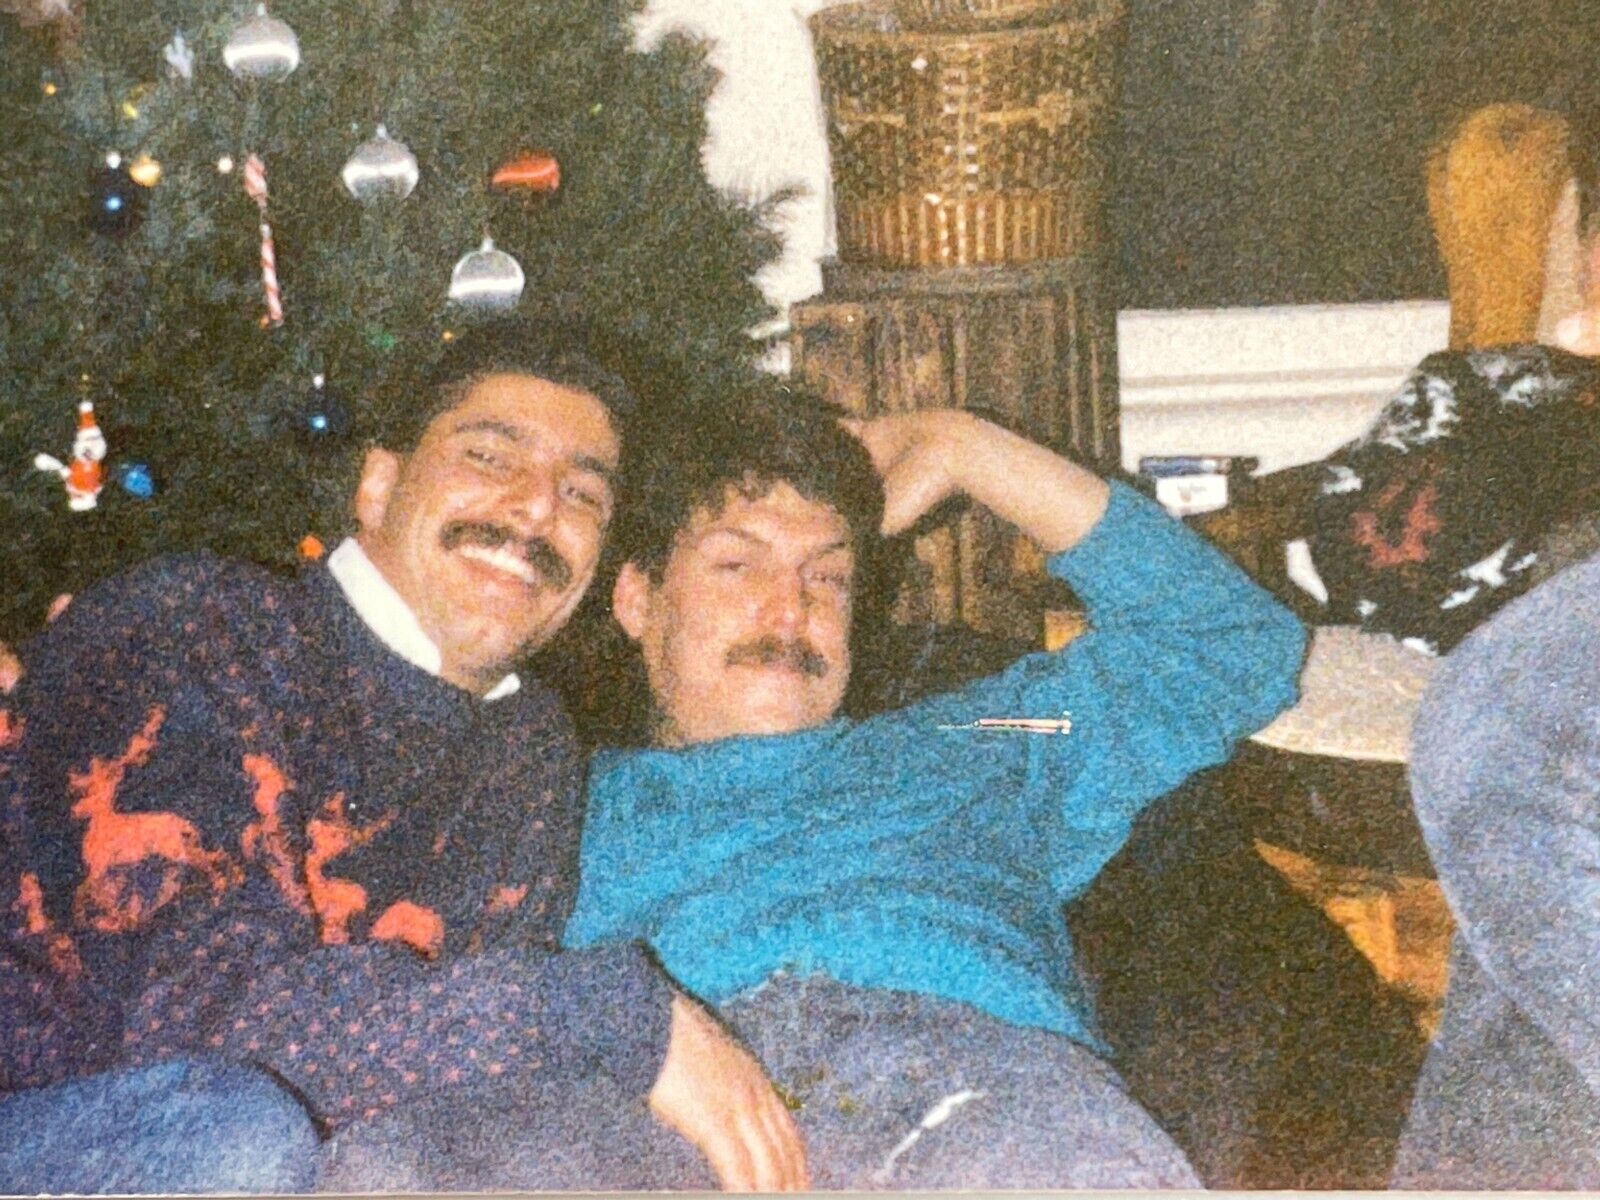 DD) Photograph Cute Amorous Affectionate Men Gay Couple 1980's Christmas Tree